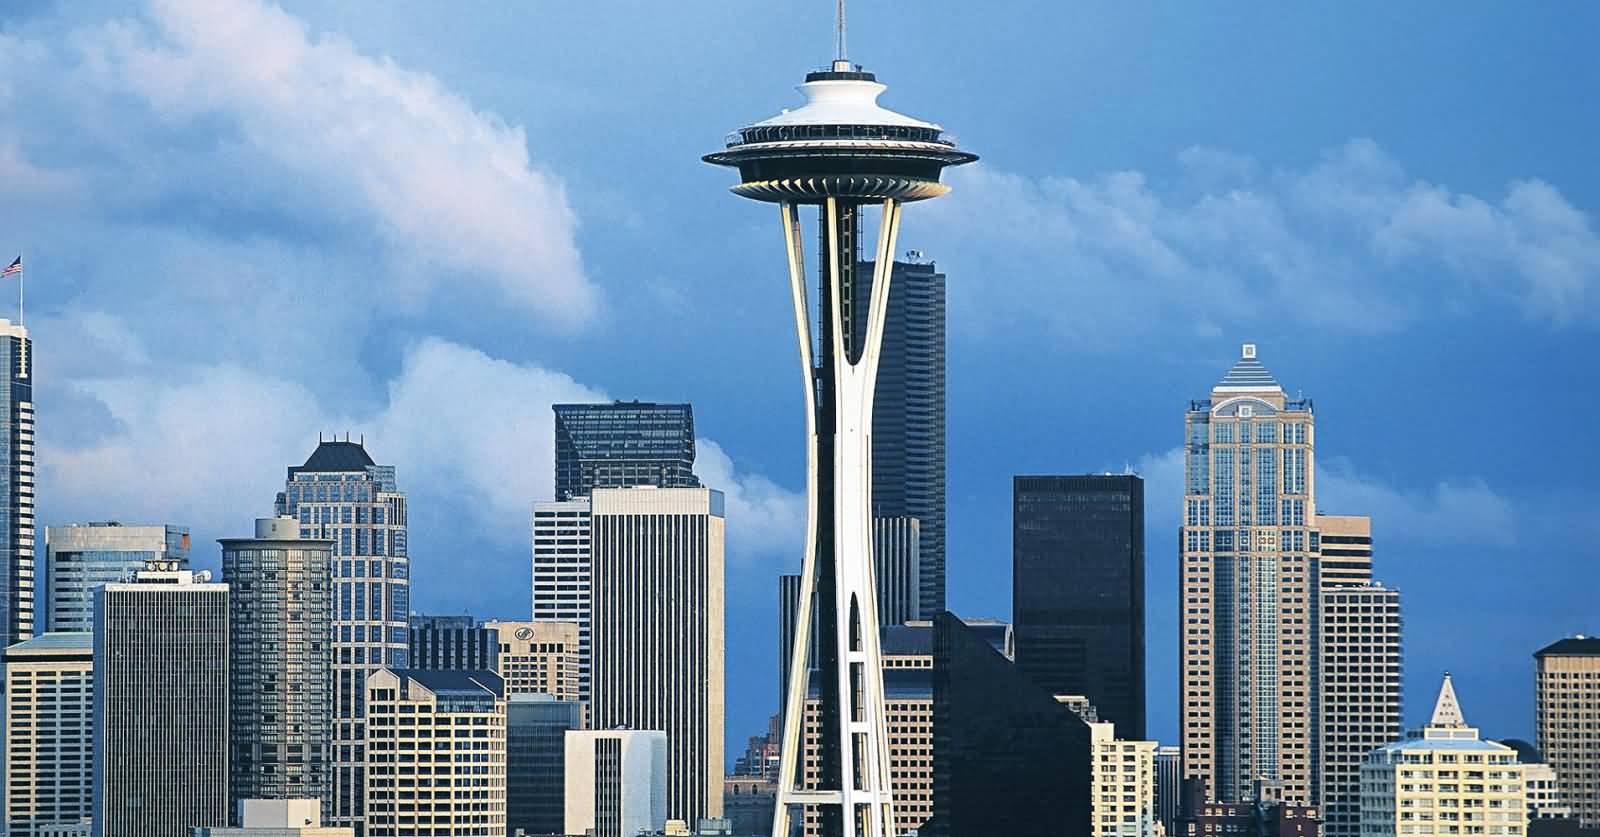 Space Needle With Surrounding Buildings